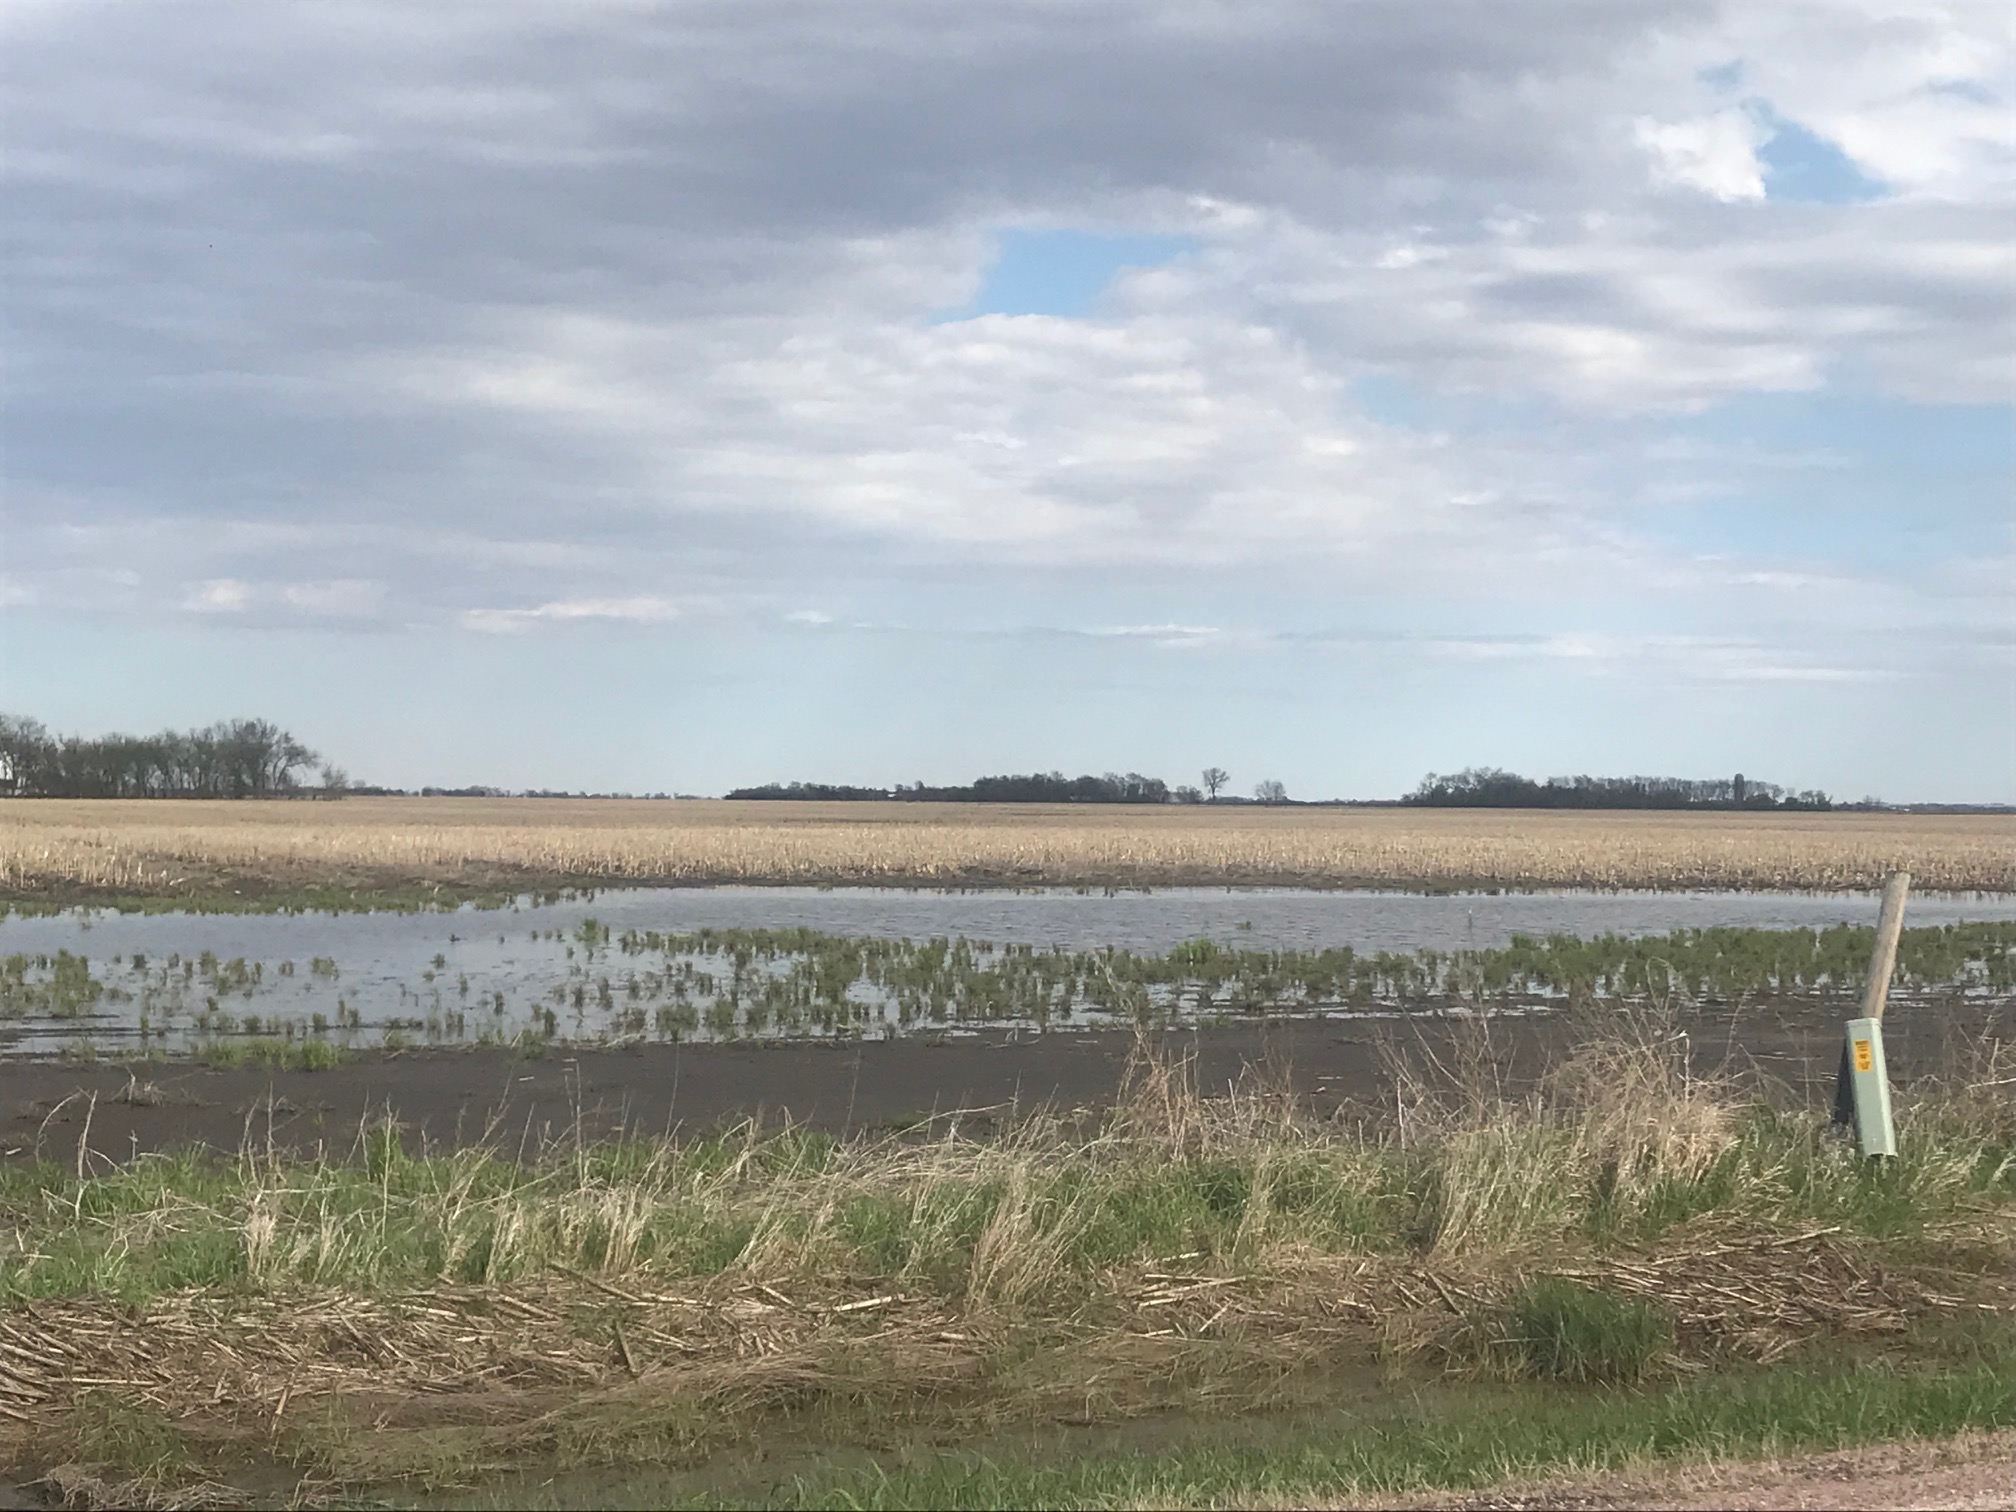 A corn field in South Dakota looking very wet due to flooding from spring rains and melted snow.